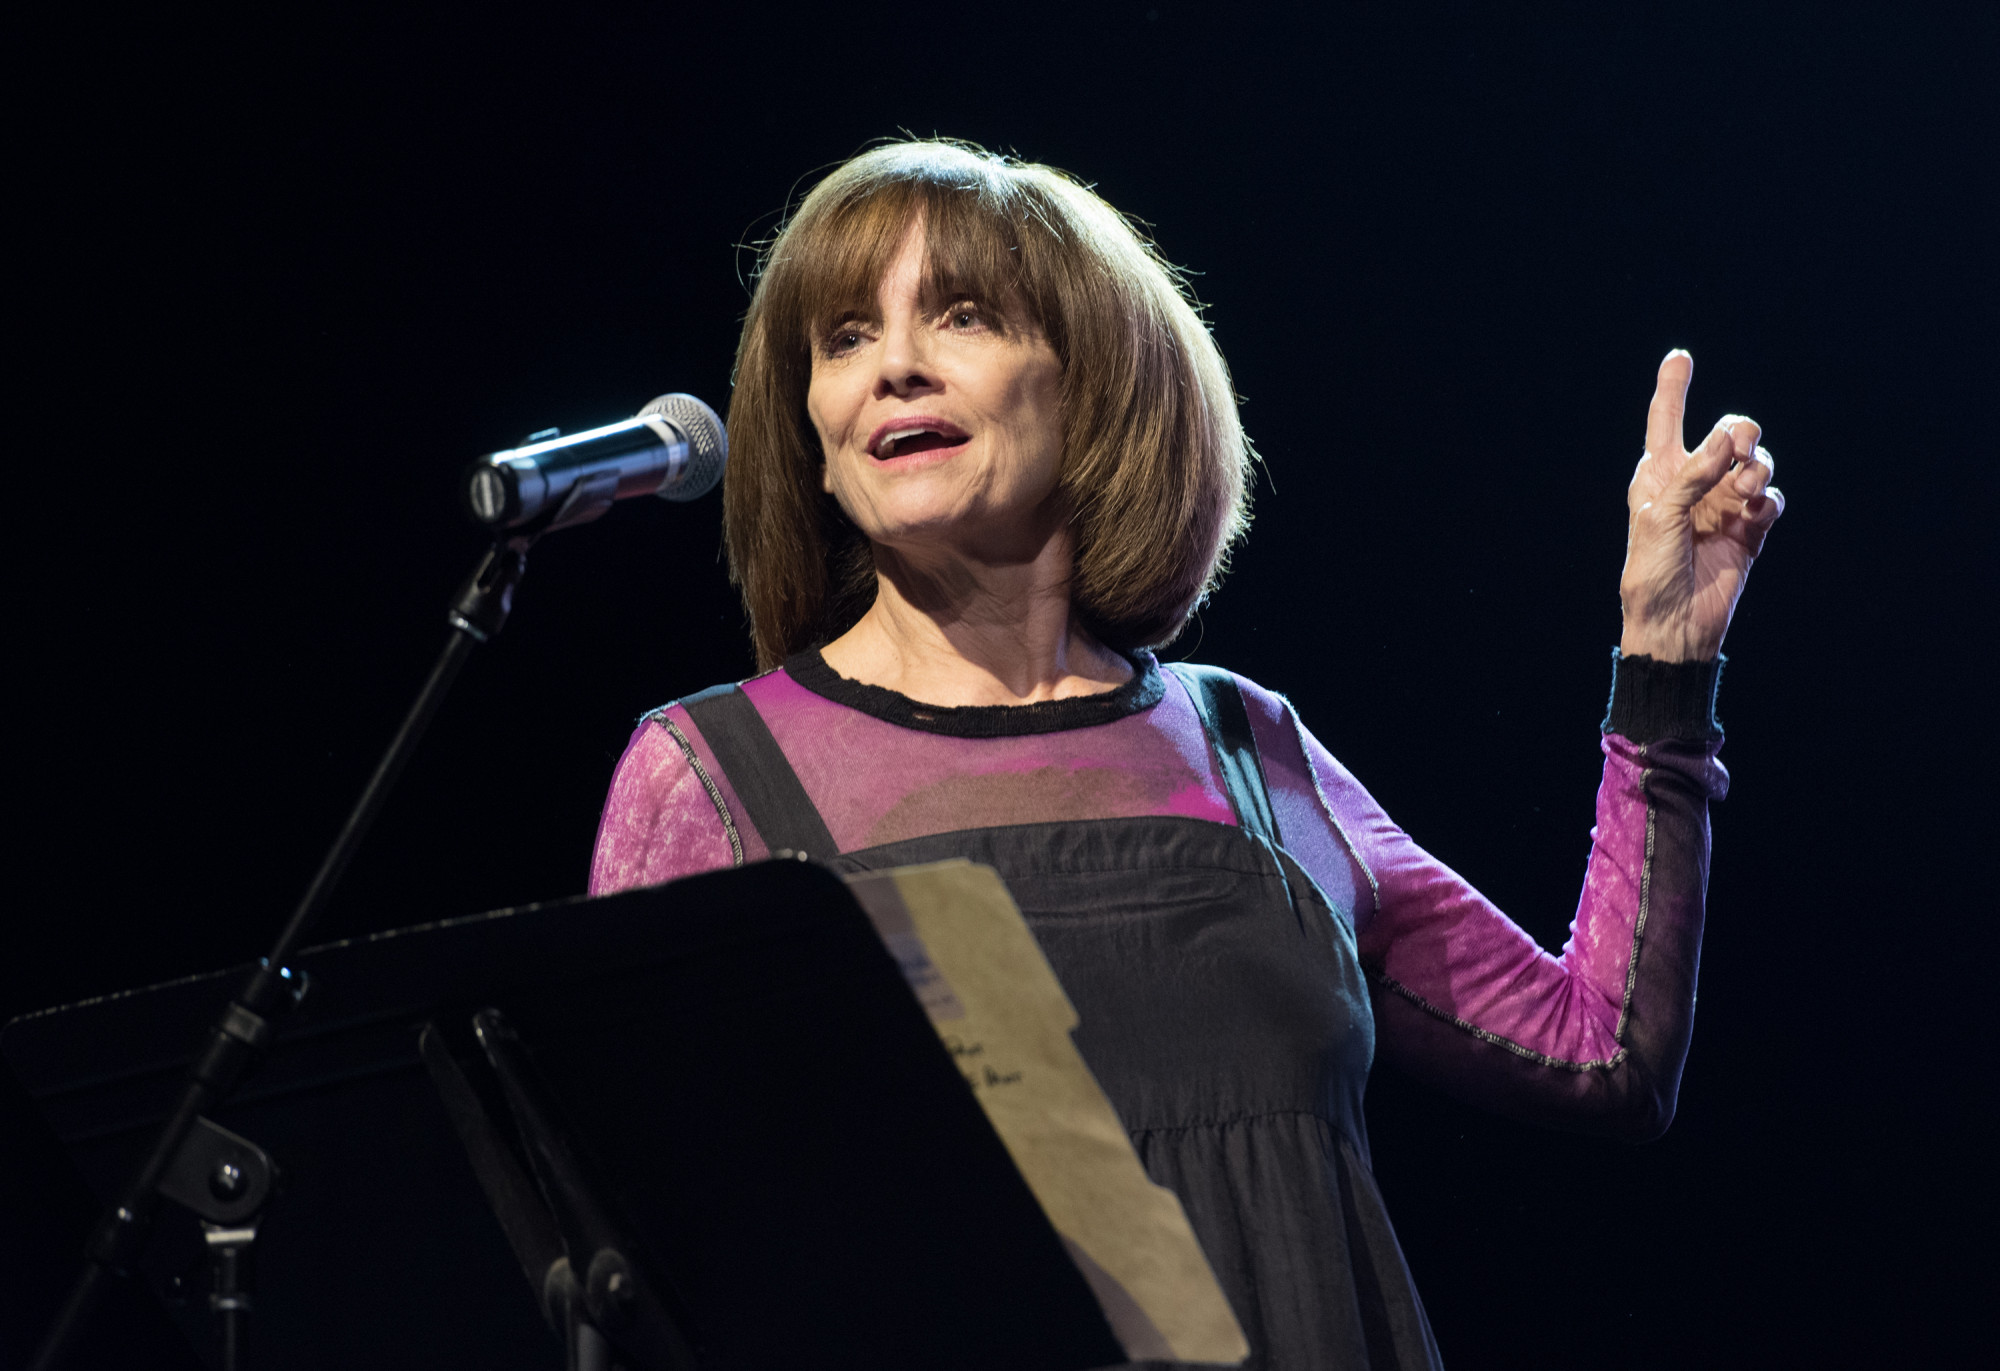 Actress Valerie Harper Dies at Age 80, People Pay Tribute to Her